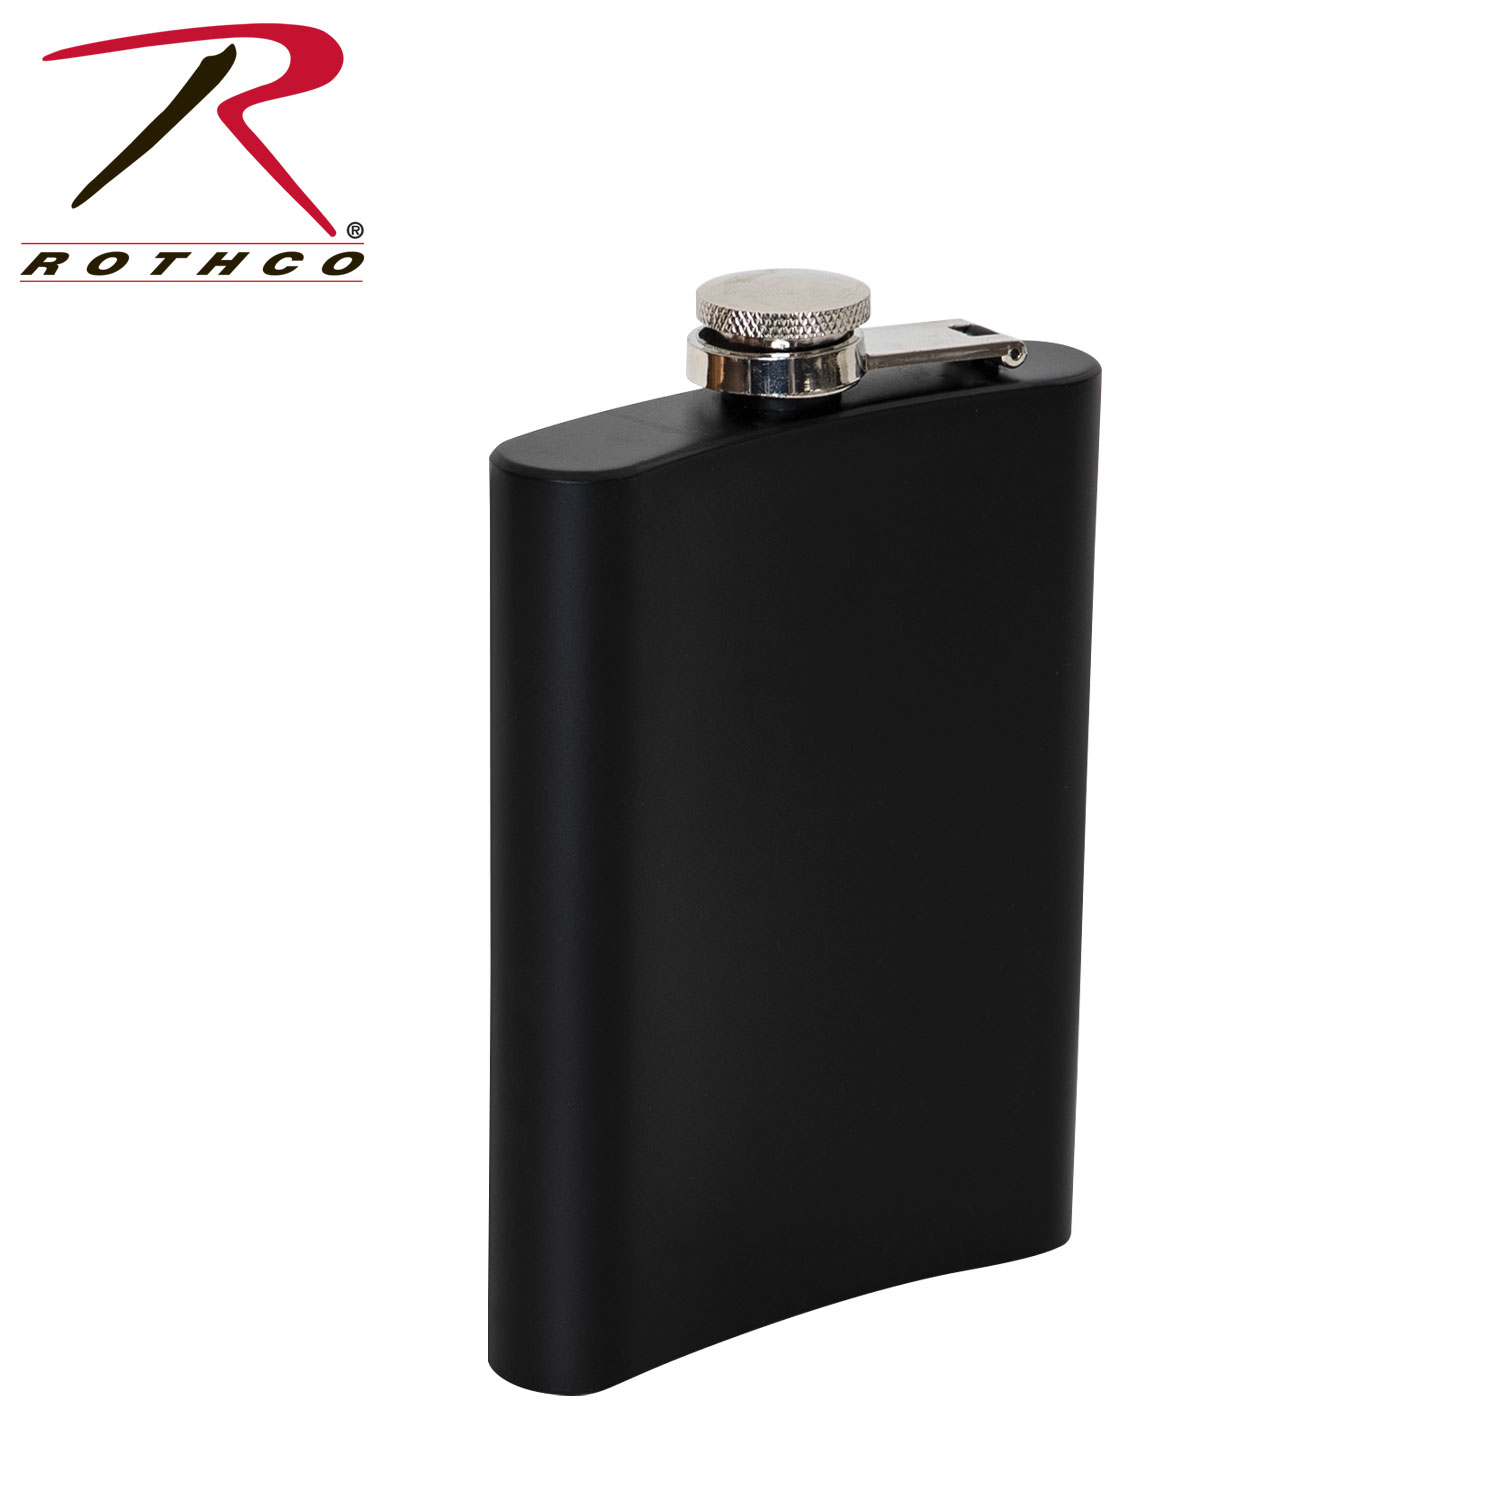 ENGRAVED STAINLESS STEEL FLASK - ROTHCO - BLACK